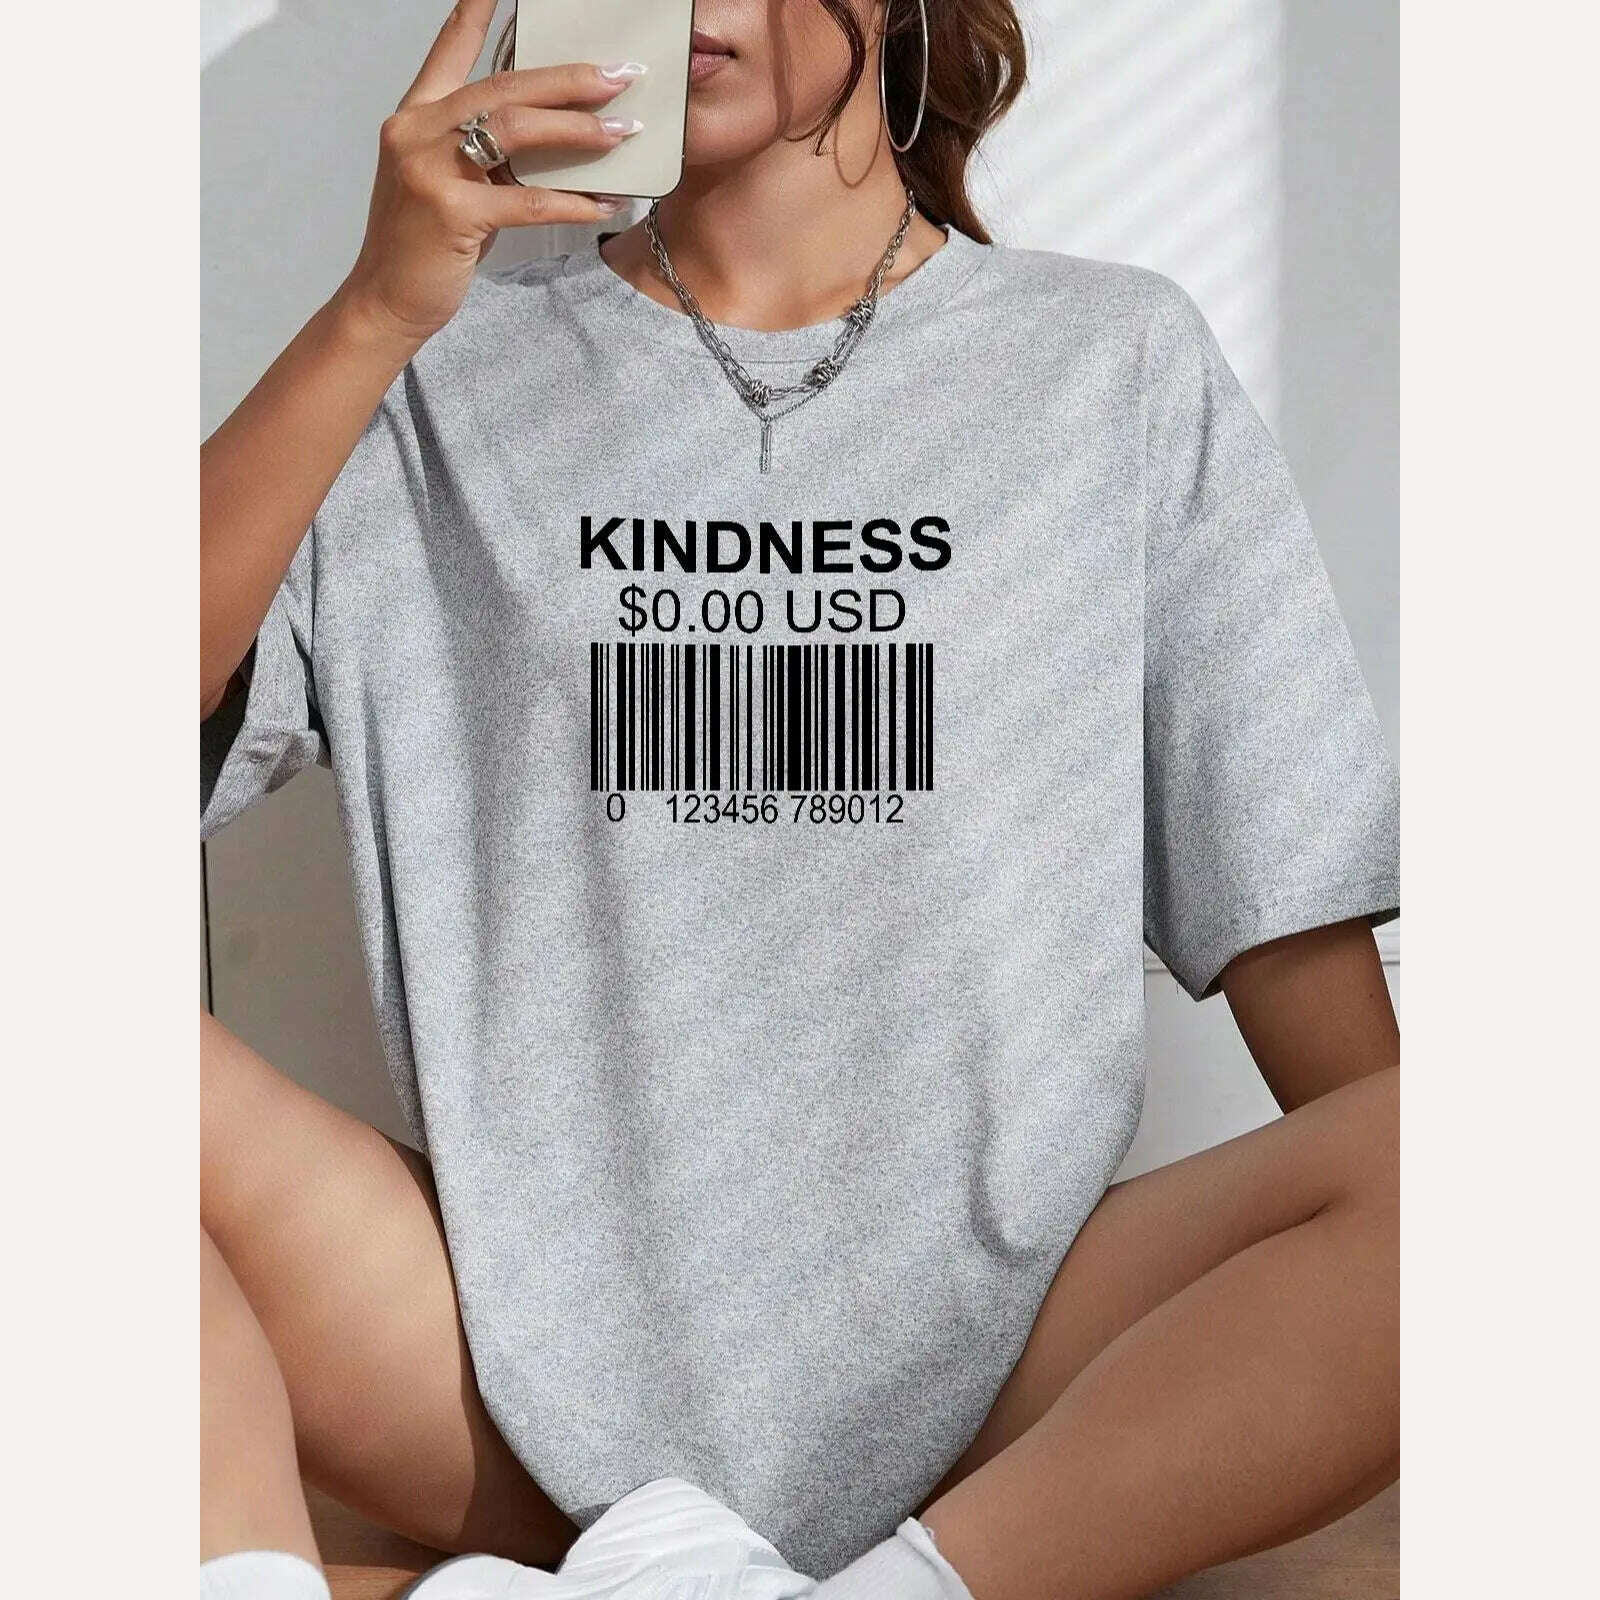 KIMLUD, Kindness Creative Bar Code Creativity Womens Short Sleeve Funny Casual Oversize Tops All-math Trend T-Shirts Woman Tee Clothing, GRAY / M, KIMLUD Women's Clothes